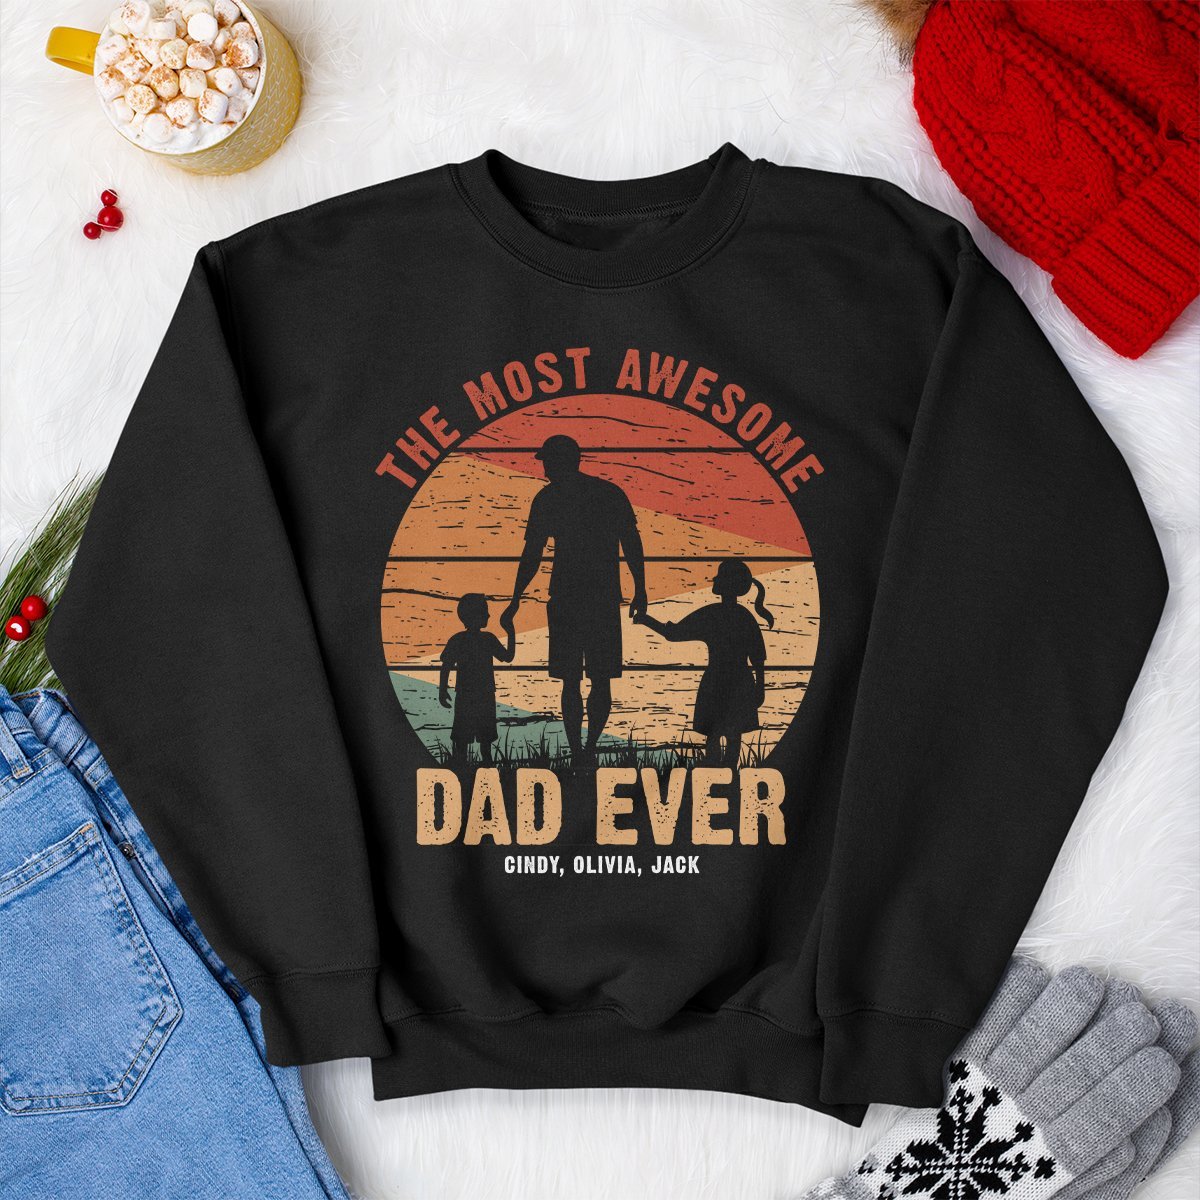 The Most Awesome Dad Ever Personalized Shirt